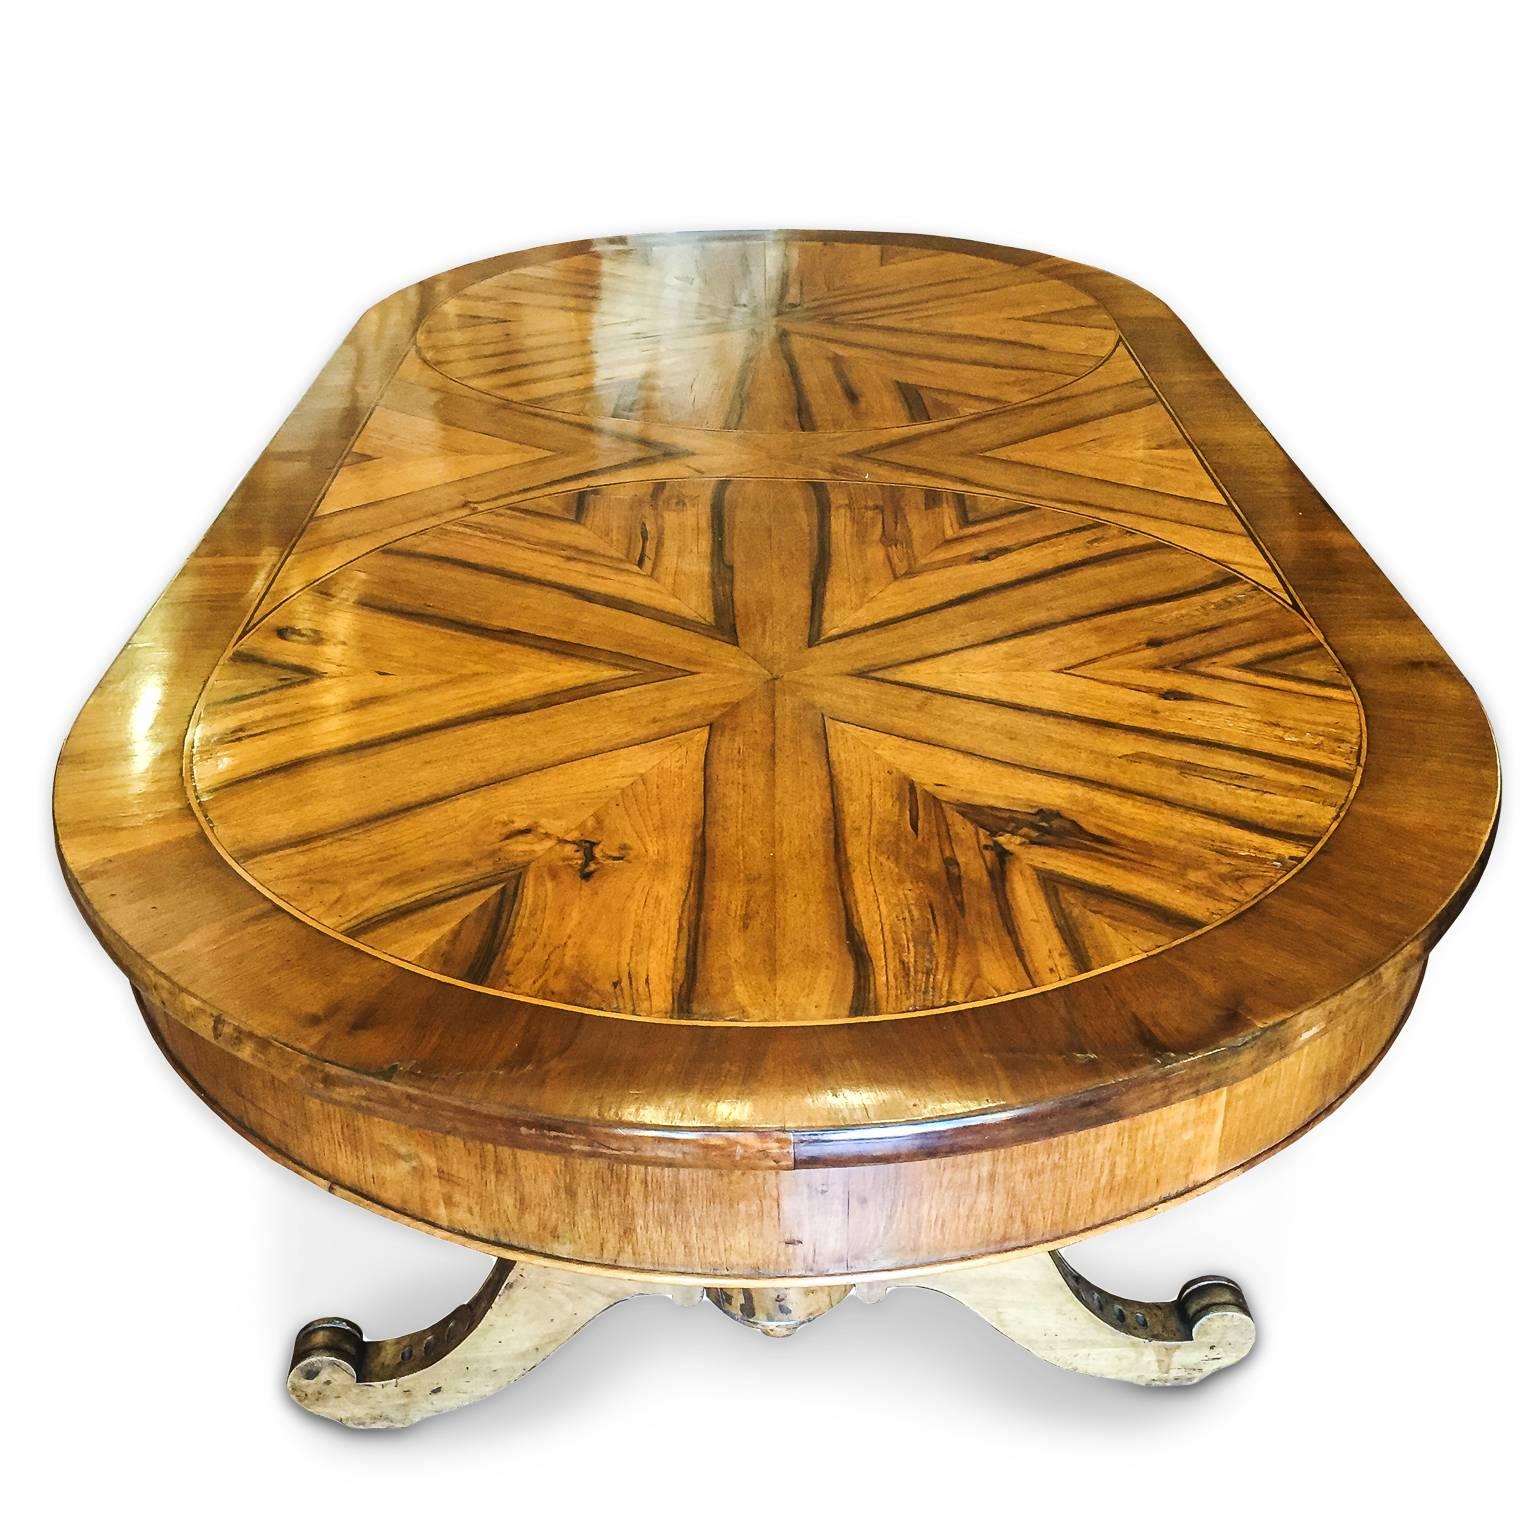 Mid-19th century Italian walnut oval table, or conference center table, with a great maple and walnut veneered and inlaid large top. 
The maple and walnut veneer is placed with geometrical patterns, to form elegant opposite chiaroscuro contrasts